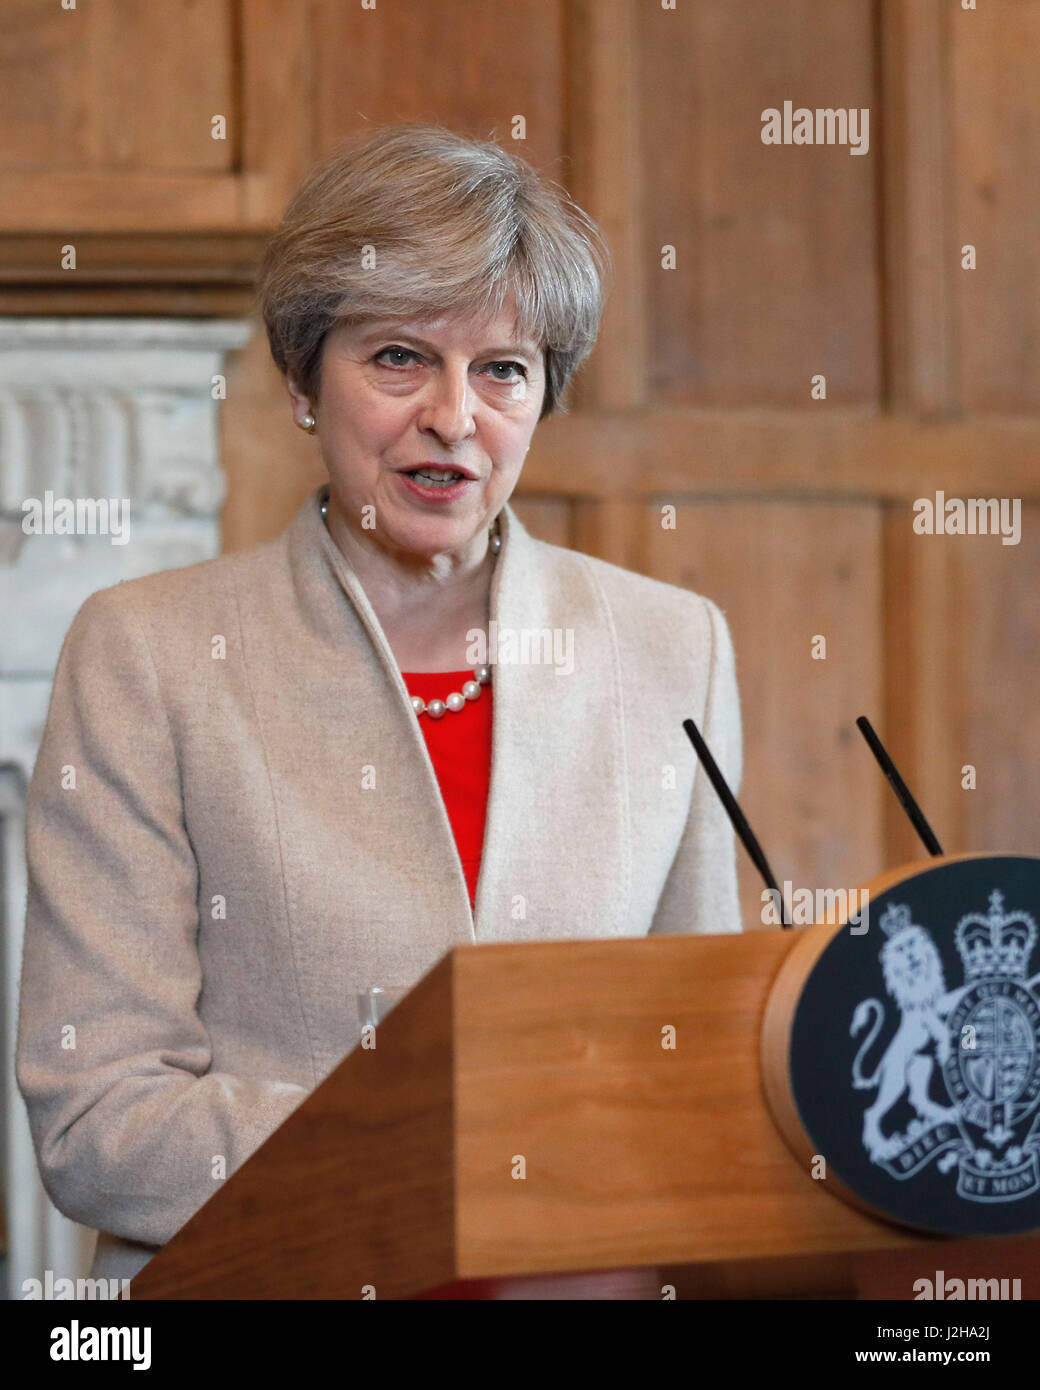 Prime Minister Theresa May speaks during a joint press conference with Japan's Prime Minister Shinzo Abe after their meeting at Chequers. Stock Photo